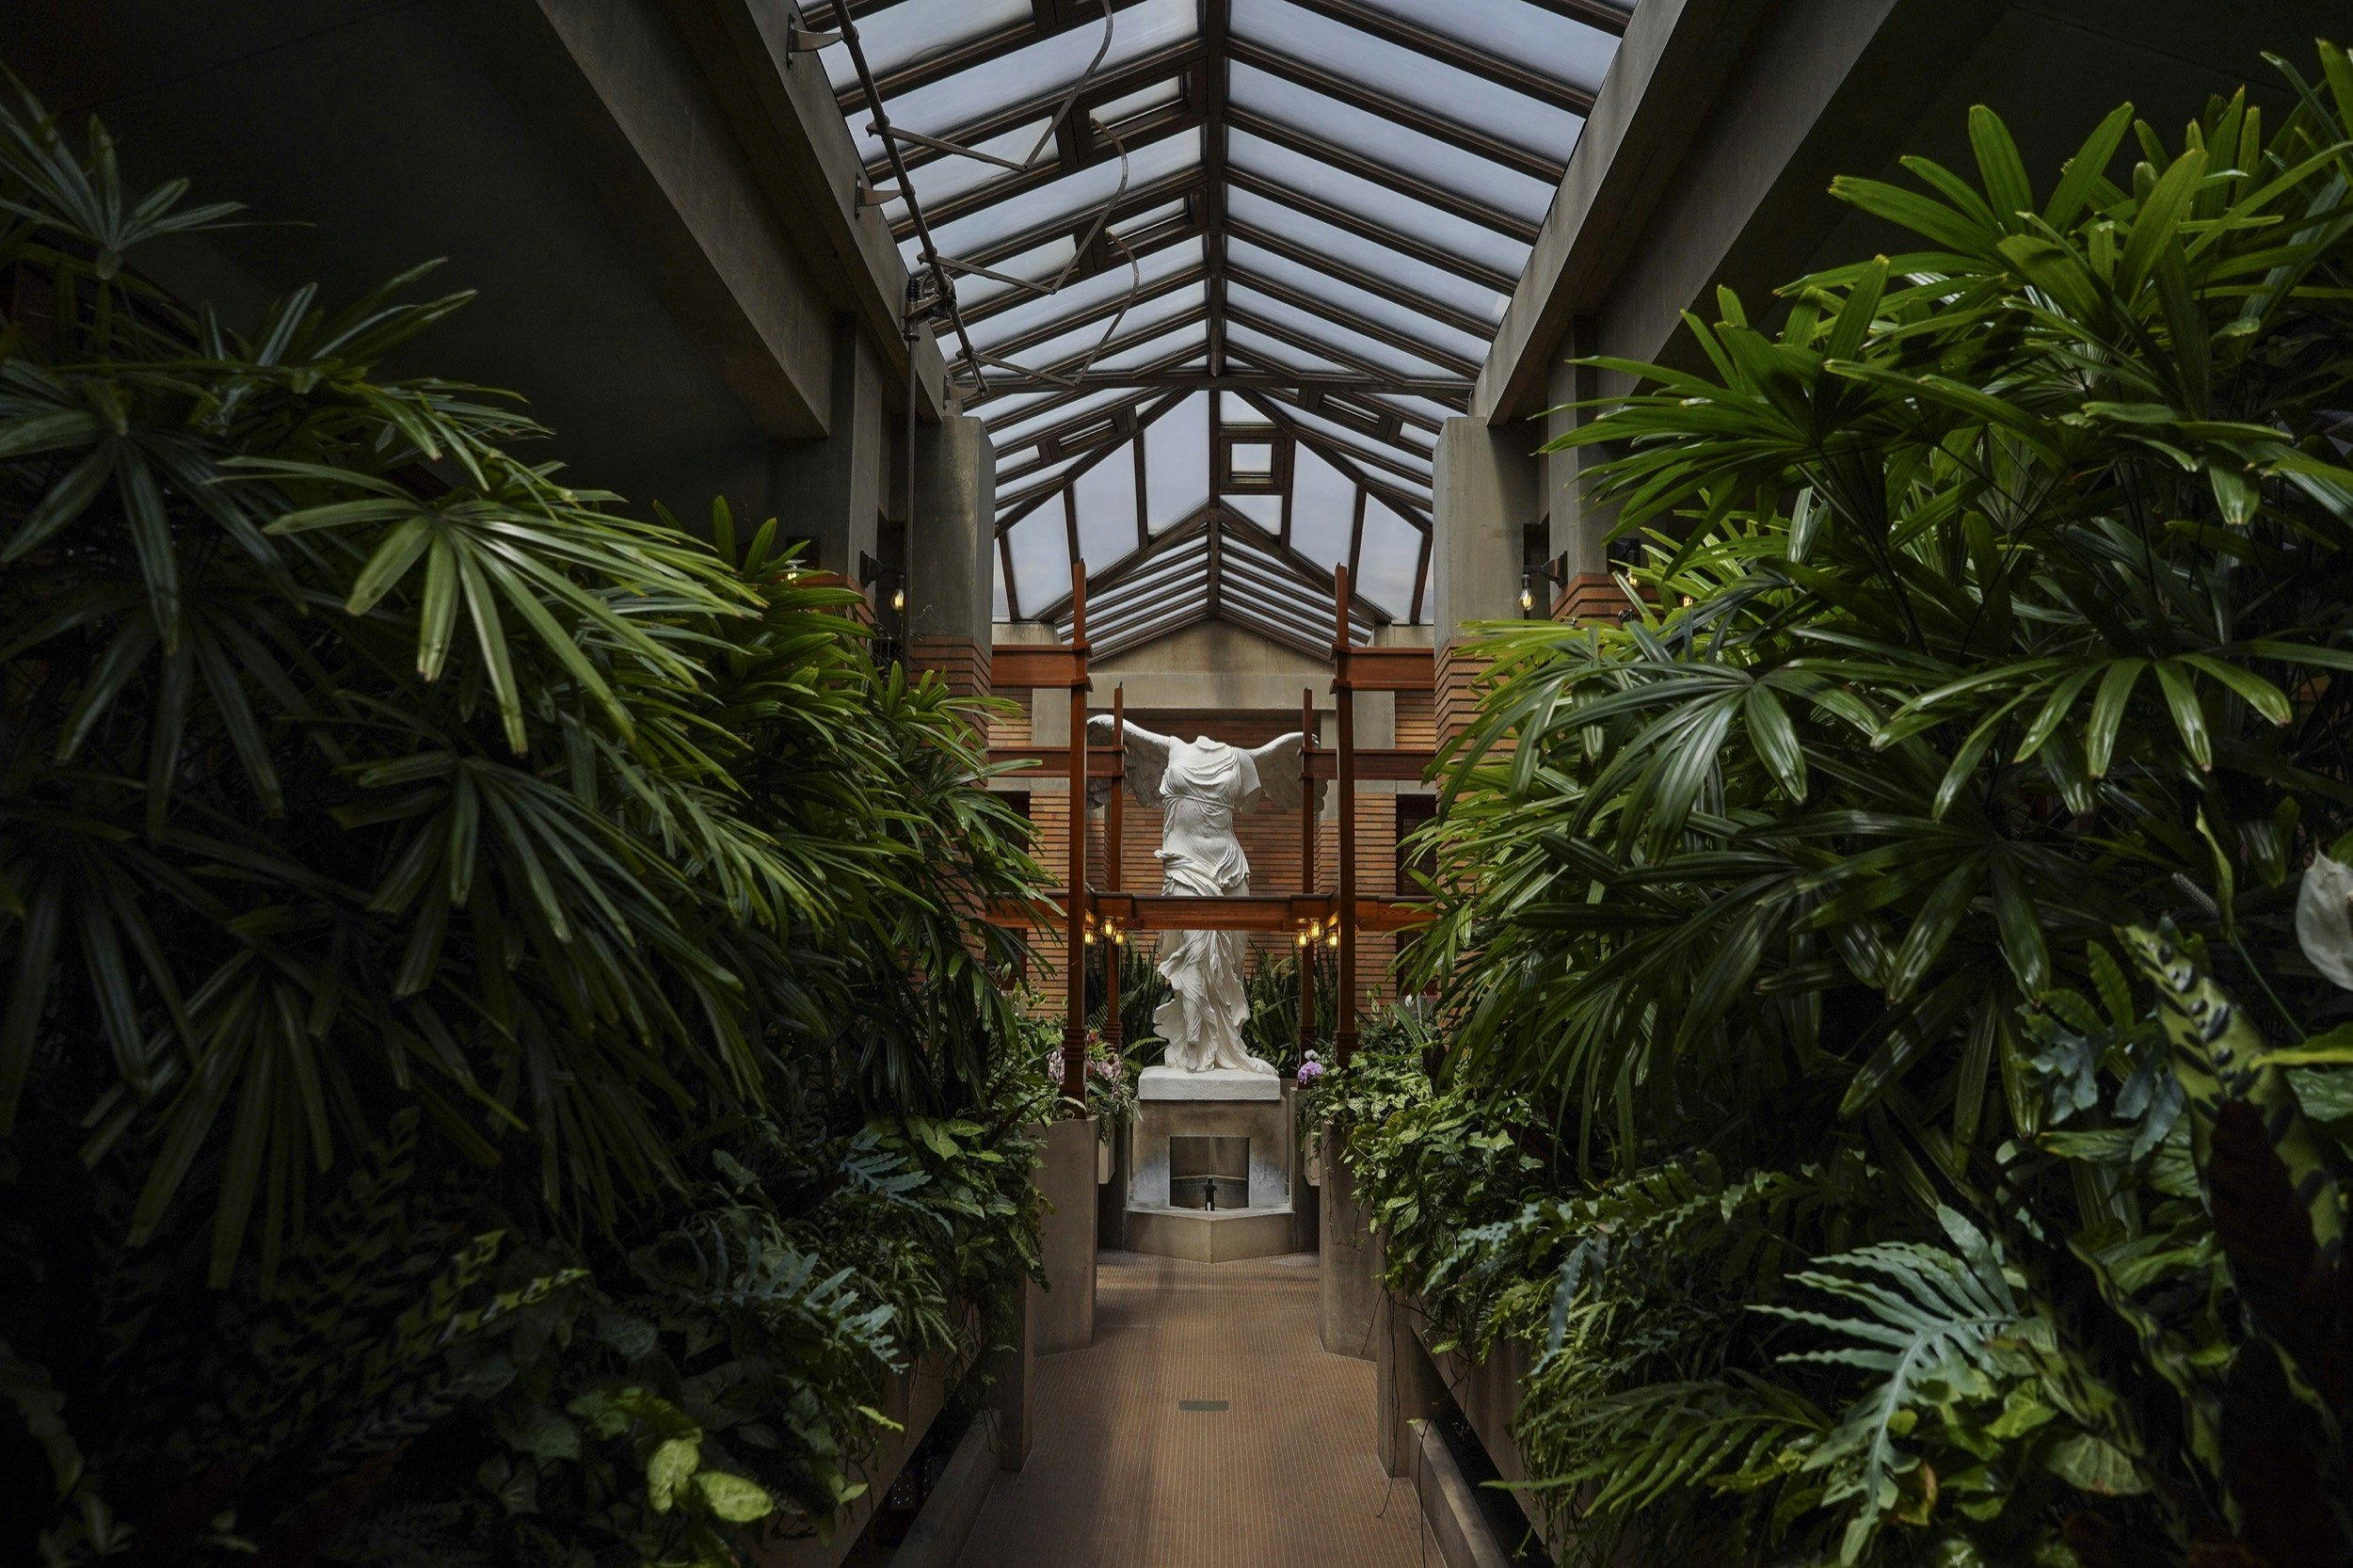 A statue of Nike of Samothrace presides over the conservatory at the Martin House, designed by Frank Lloyd Wright, in Buffalo